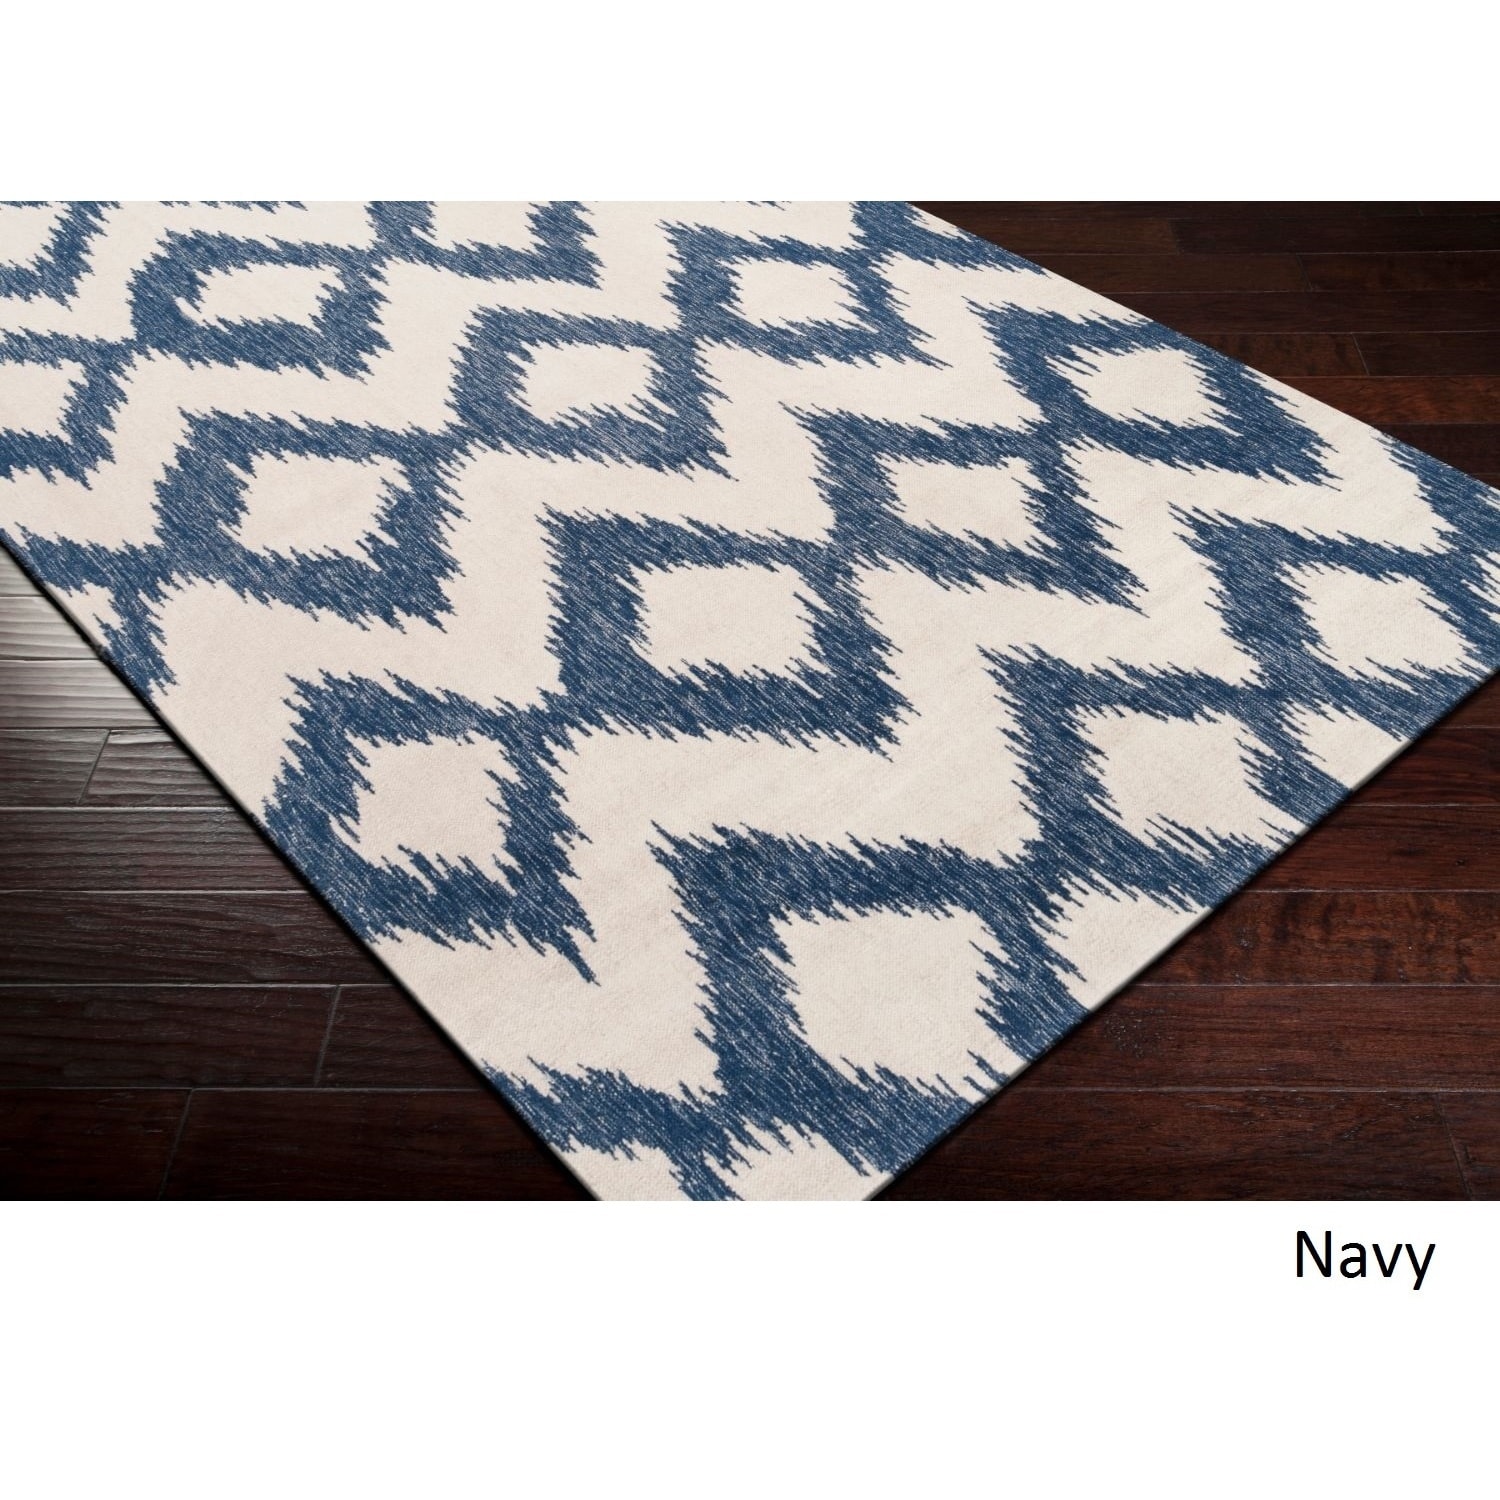 https://ak1.ostkcdn.com/images/products/11666151/Hand-Woven-Cleveland-Wool-Area-Rug-4b87f418-f13e-4dc7-b90c-7bb088915dda.jpg